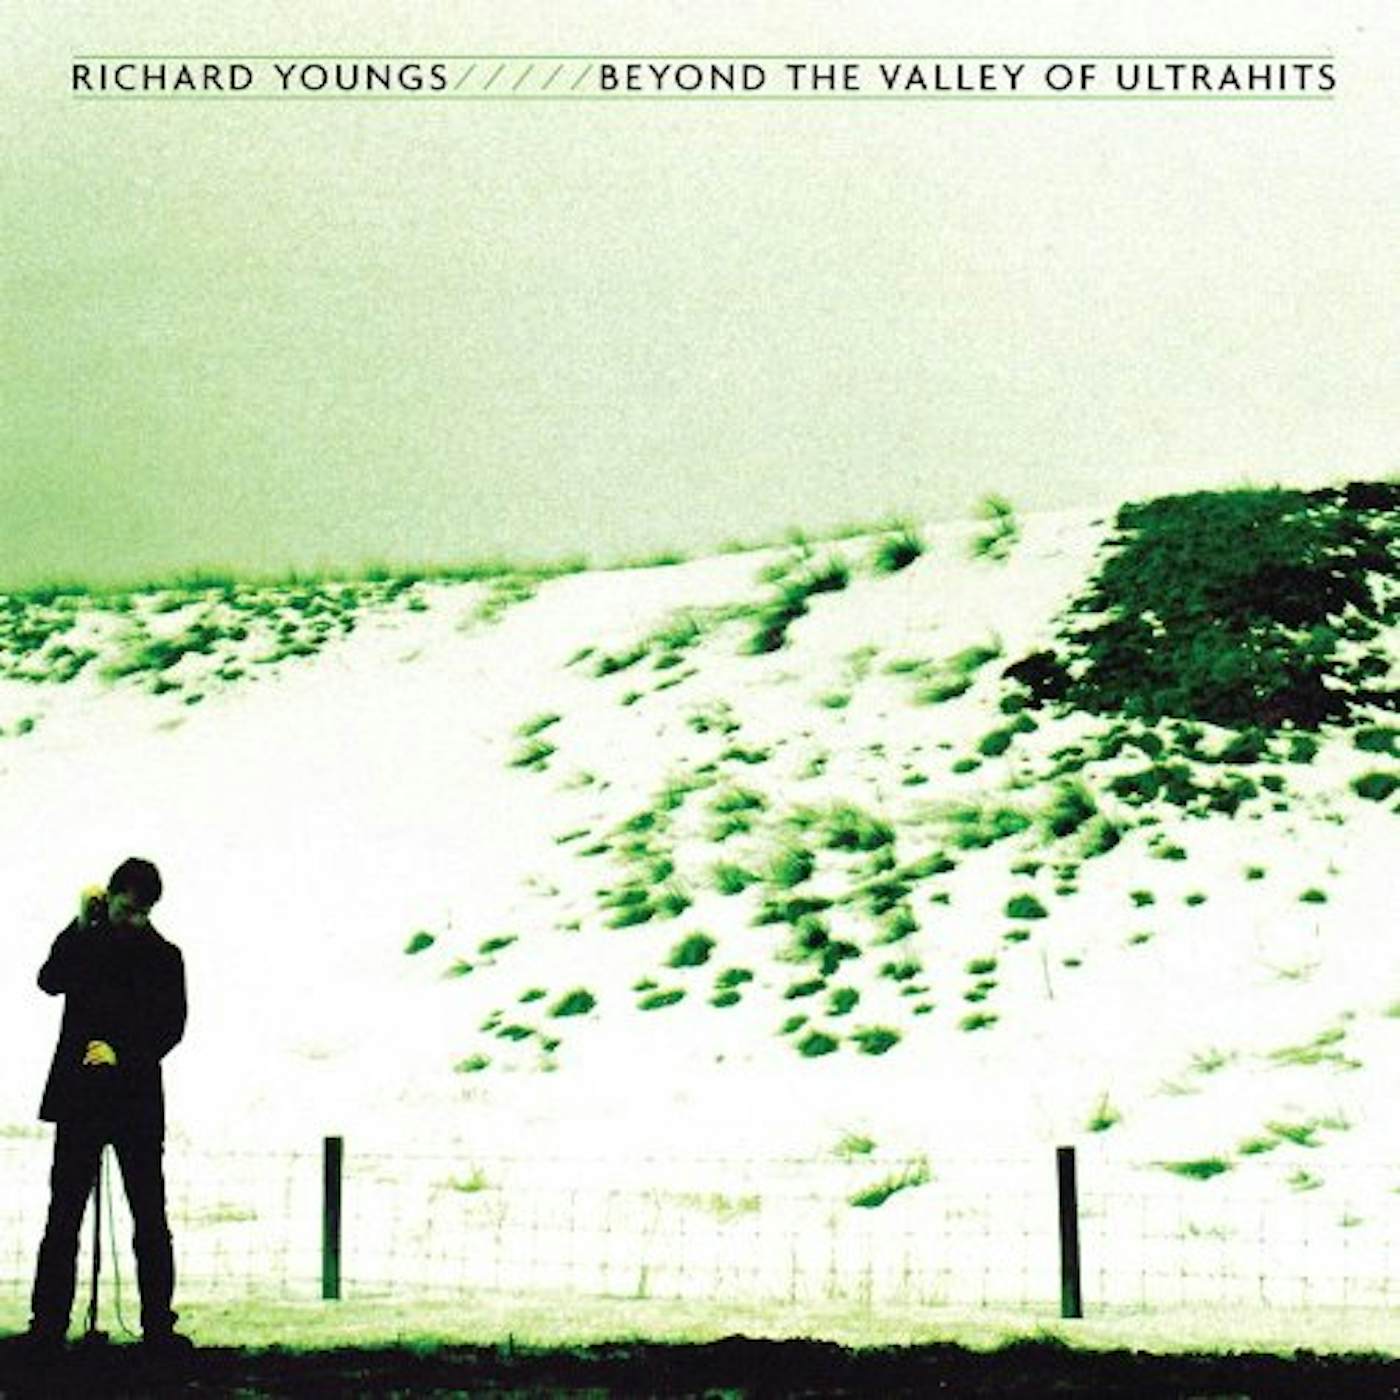 Richard Youngs Beyond The Valley Of Ultrahits Vinyl Record